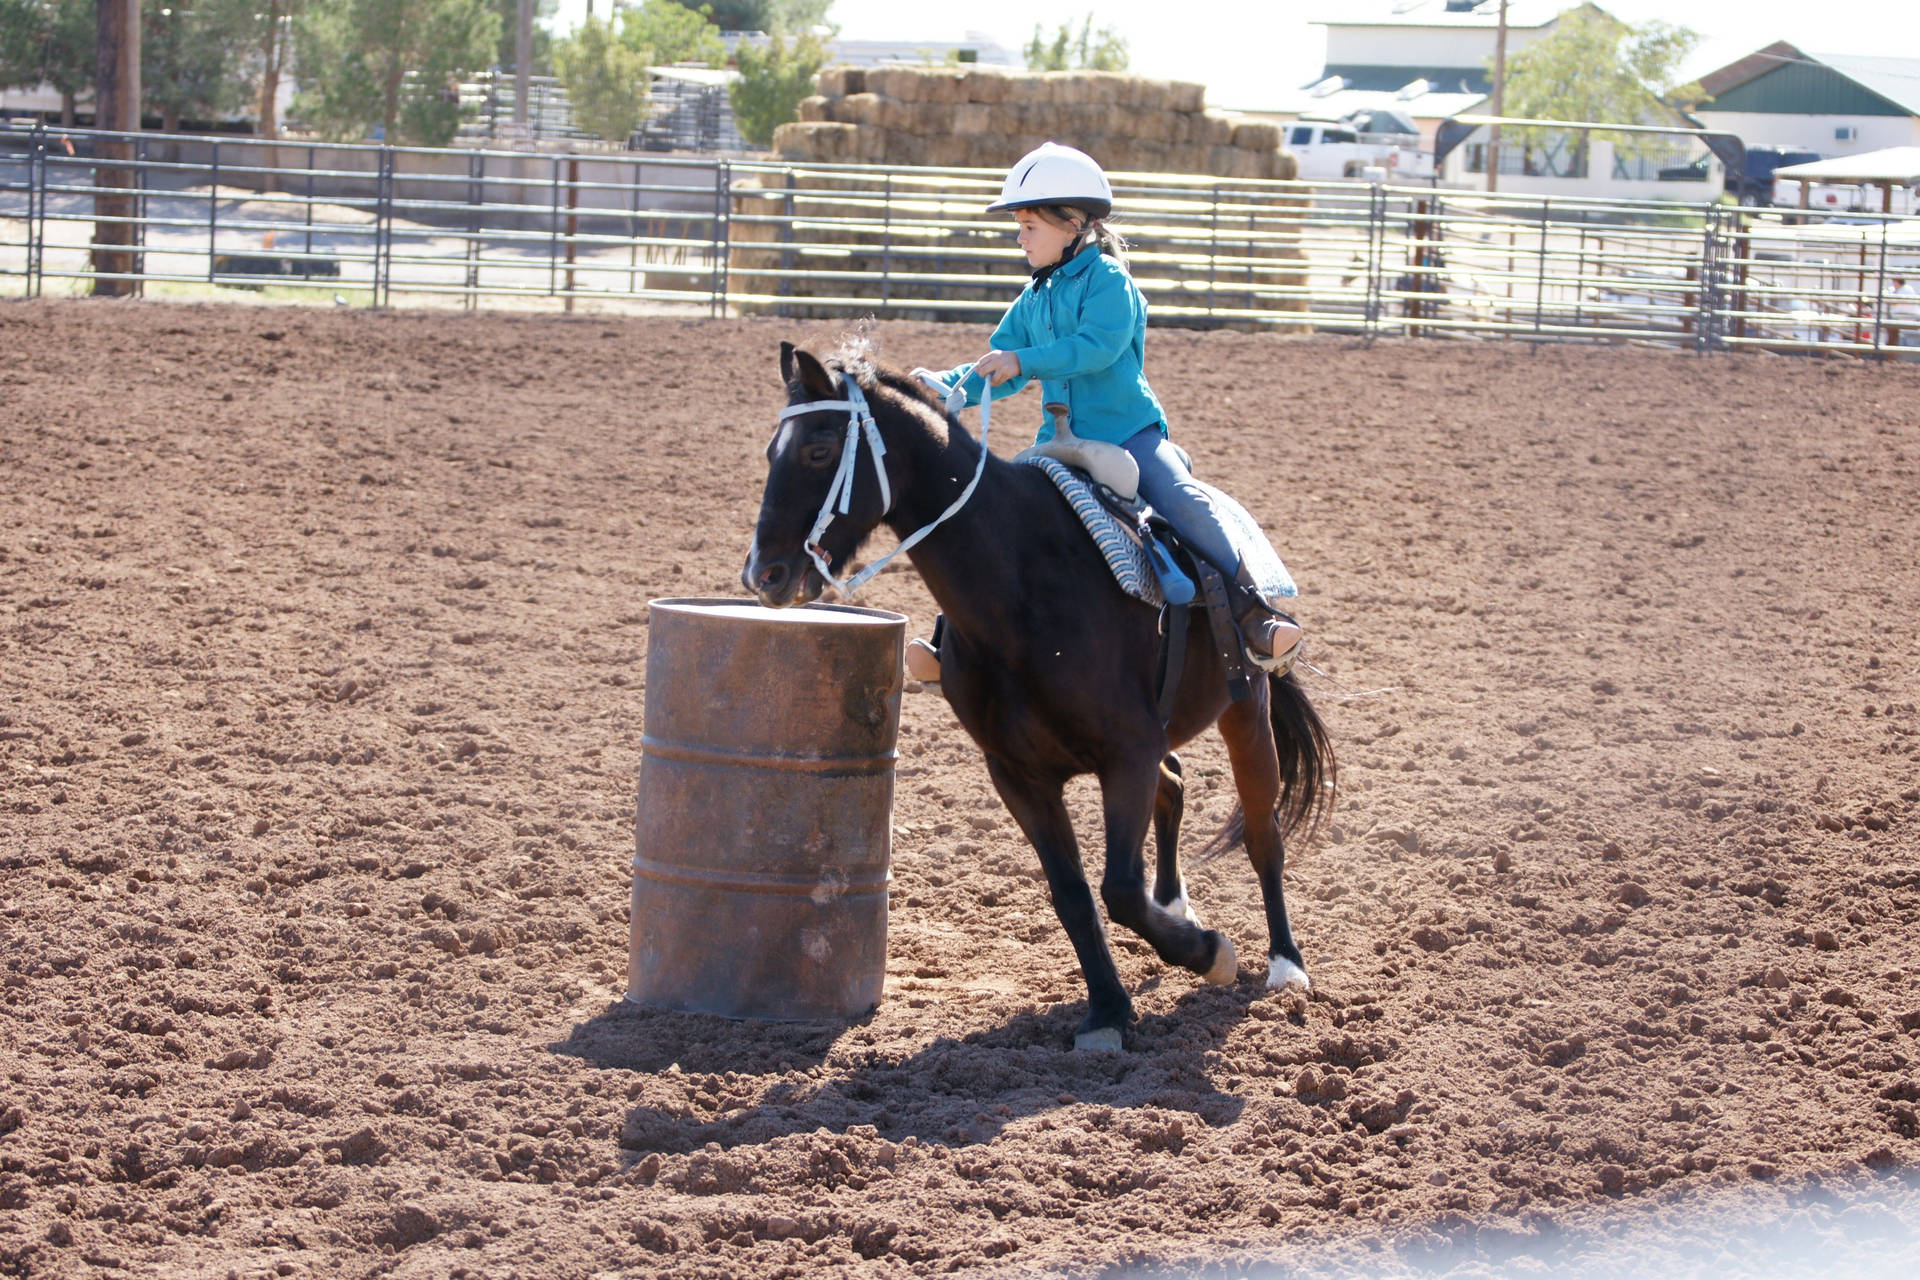 Cowboy Tapping on the Barrel Racing Horse Wallpaper